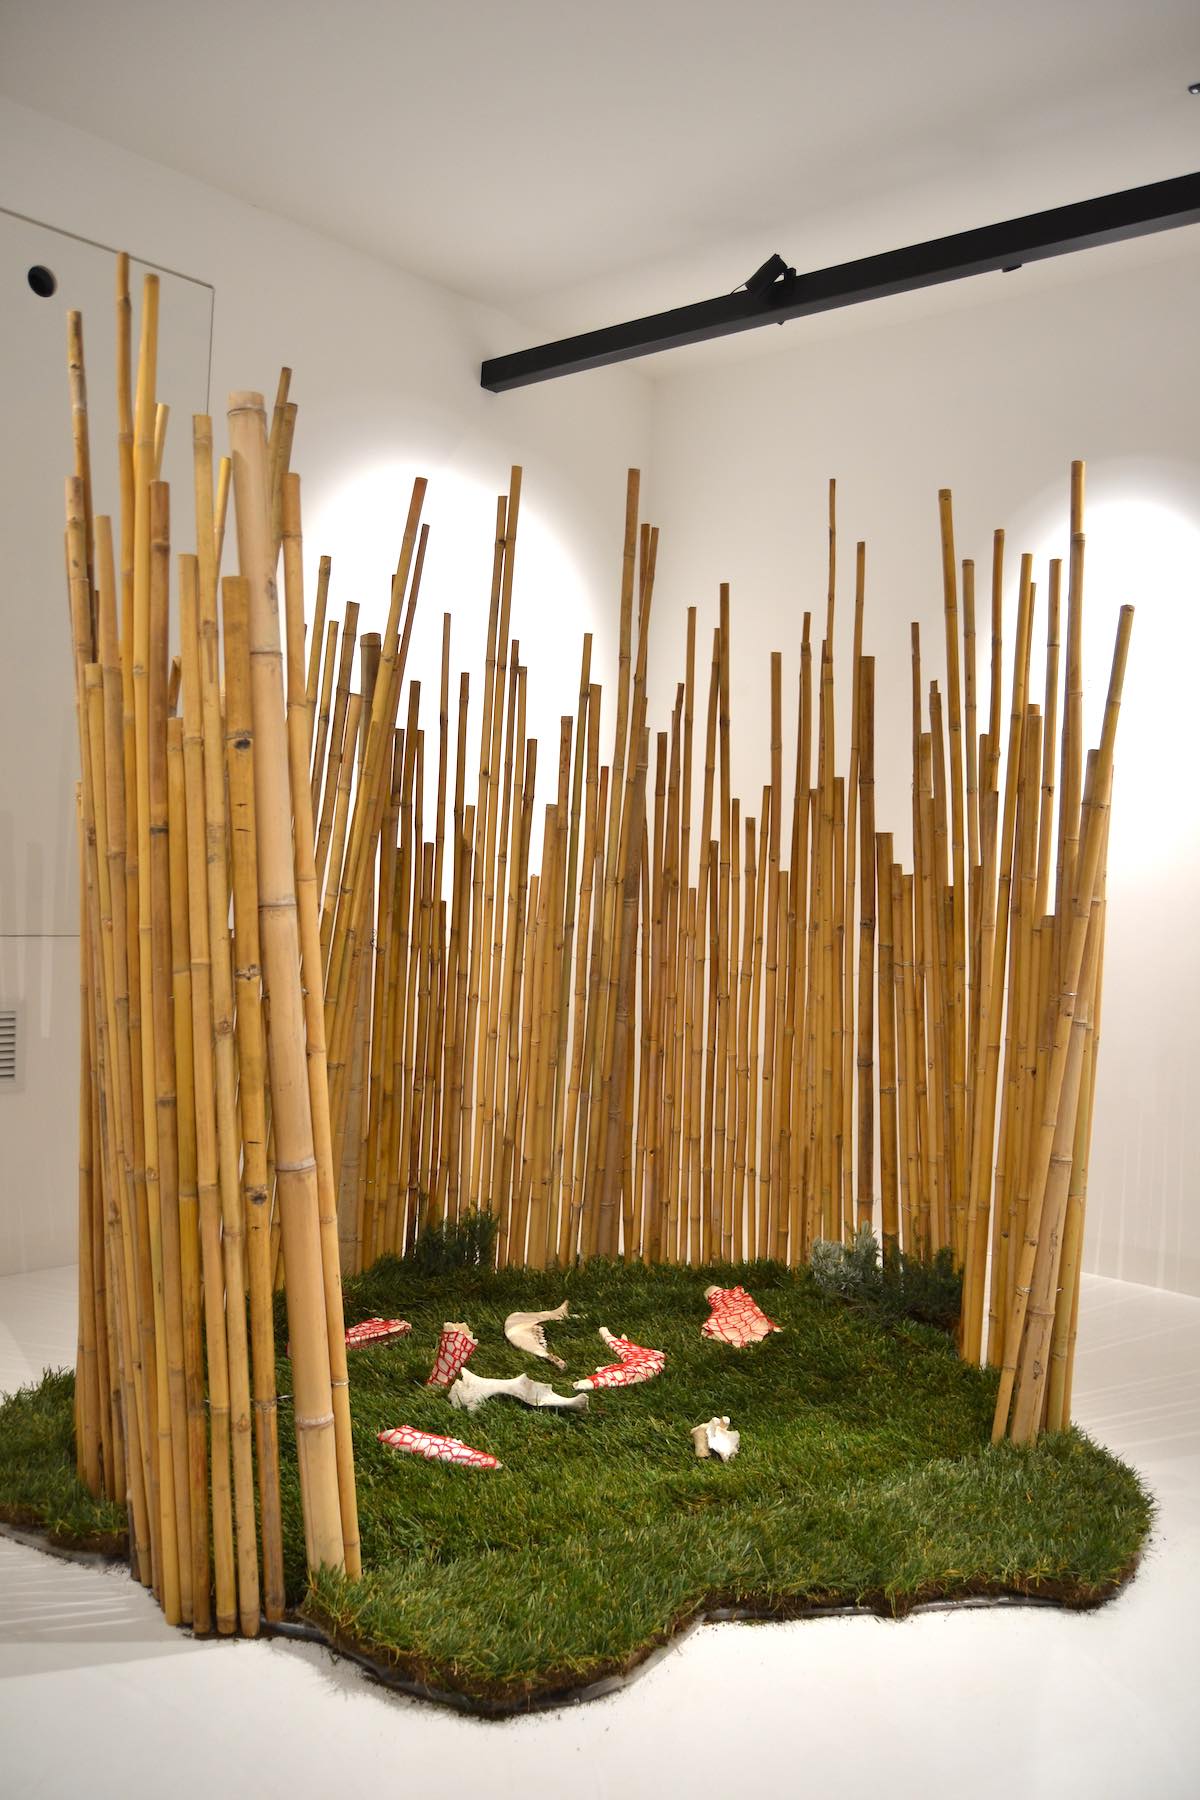 Installation art with bamboo